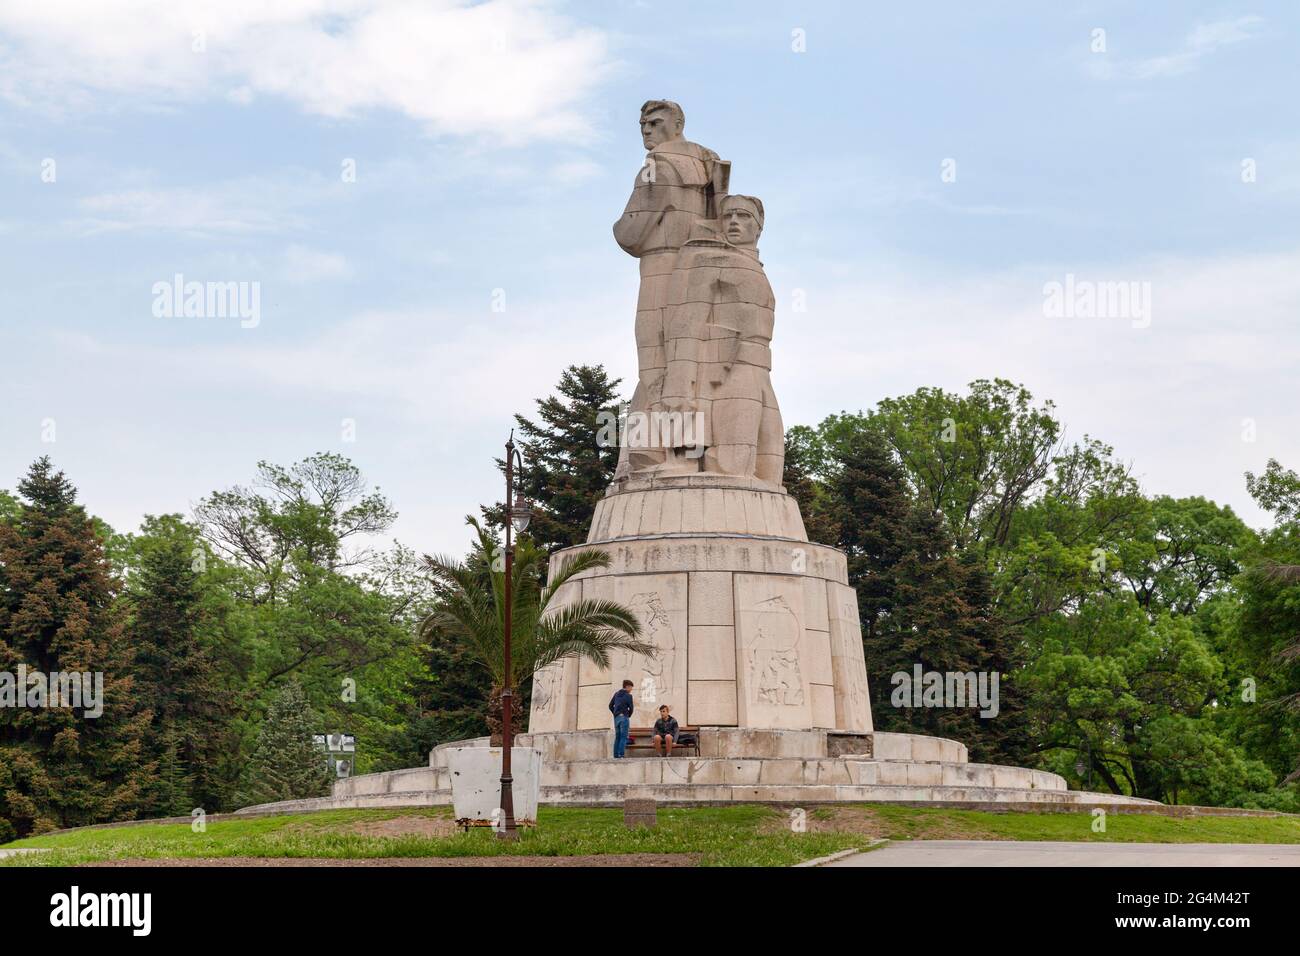 Varna, Bulgaria - May 16 2019: The Pantheon is located in the Sea Garden of the city. The monument was built in honor of the Fascist fighters fallen f Stock Photo